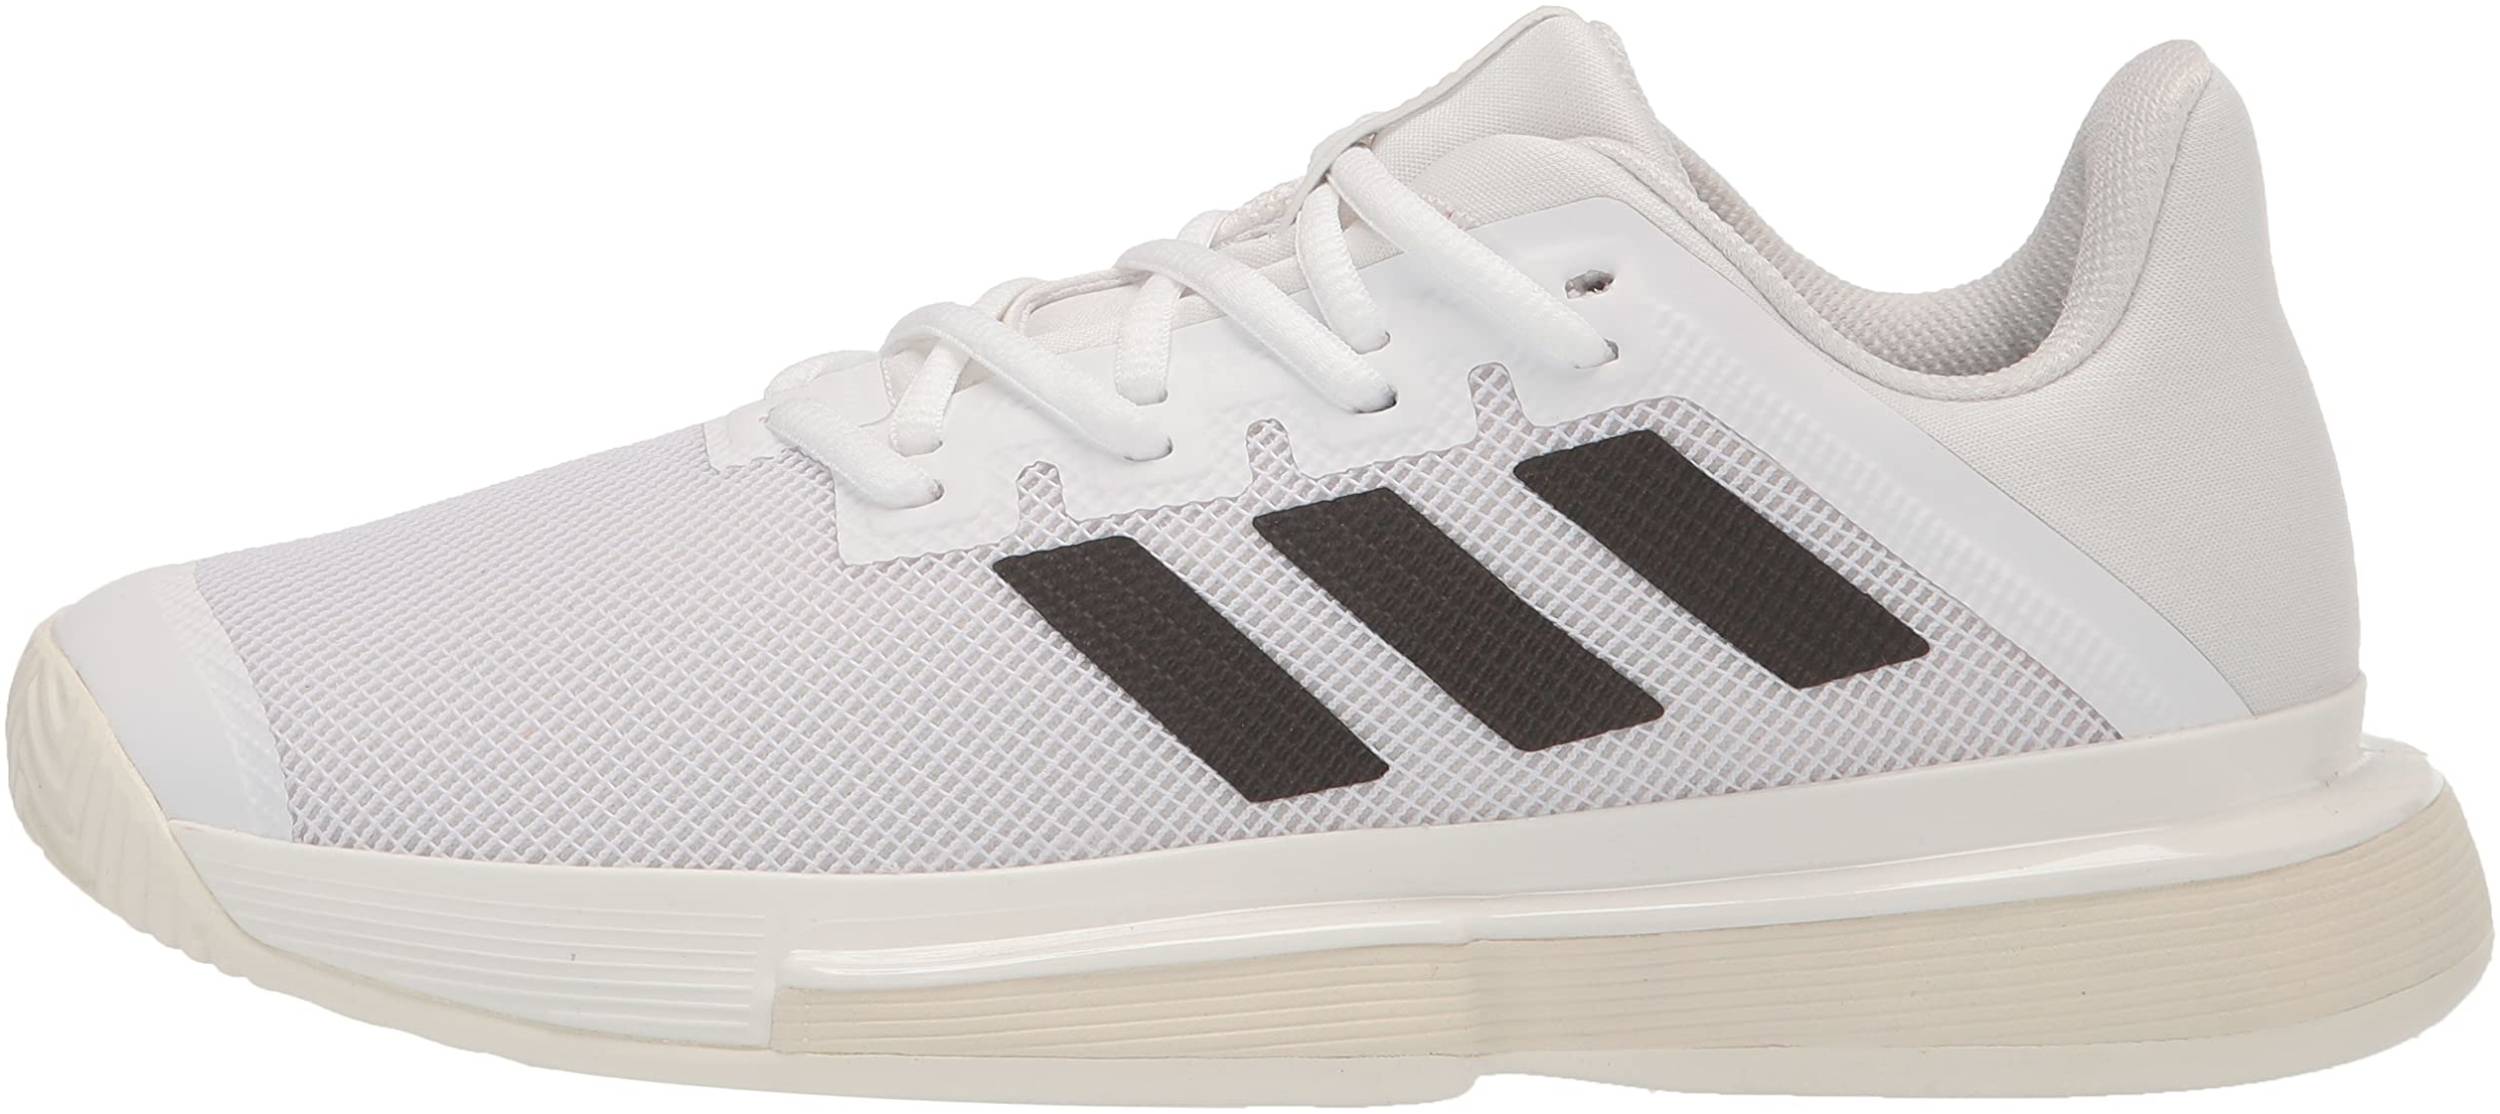 10+ White Adidas tennis shoes: Save up to 51% | RunRepeat